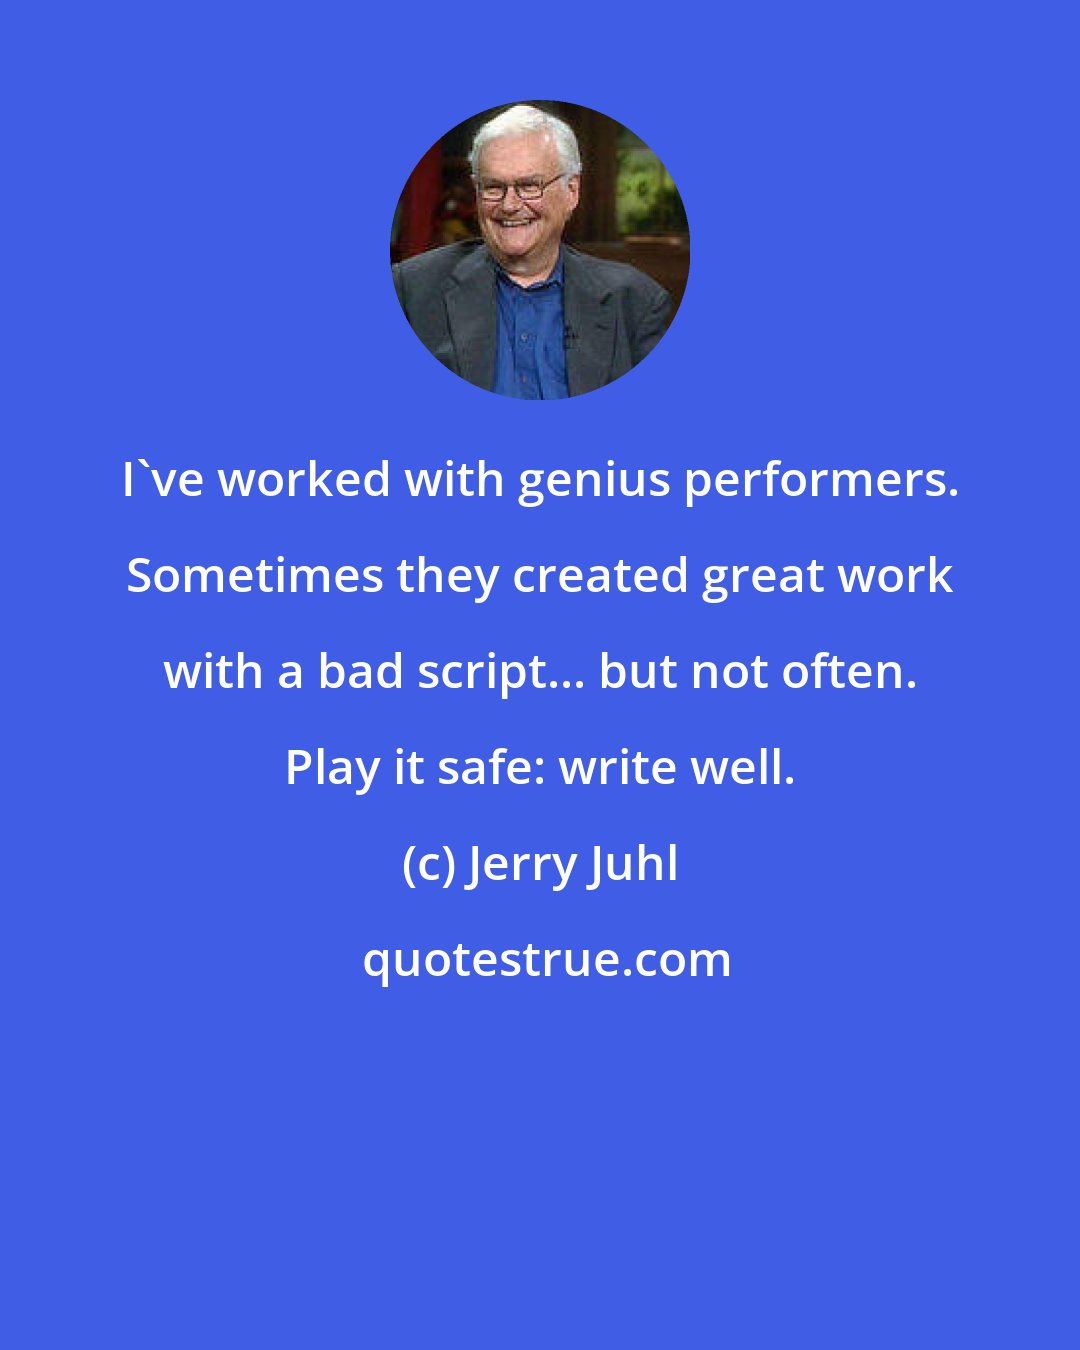 Jerry Juhl: I've worked with genius performers. Sometimes they created great work with a bad script... but not often. Play it safe: write well.